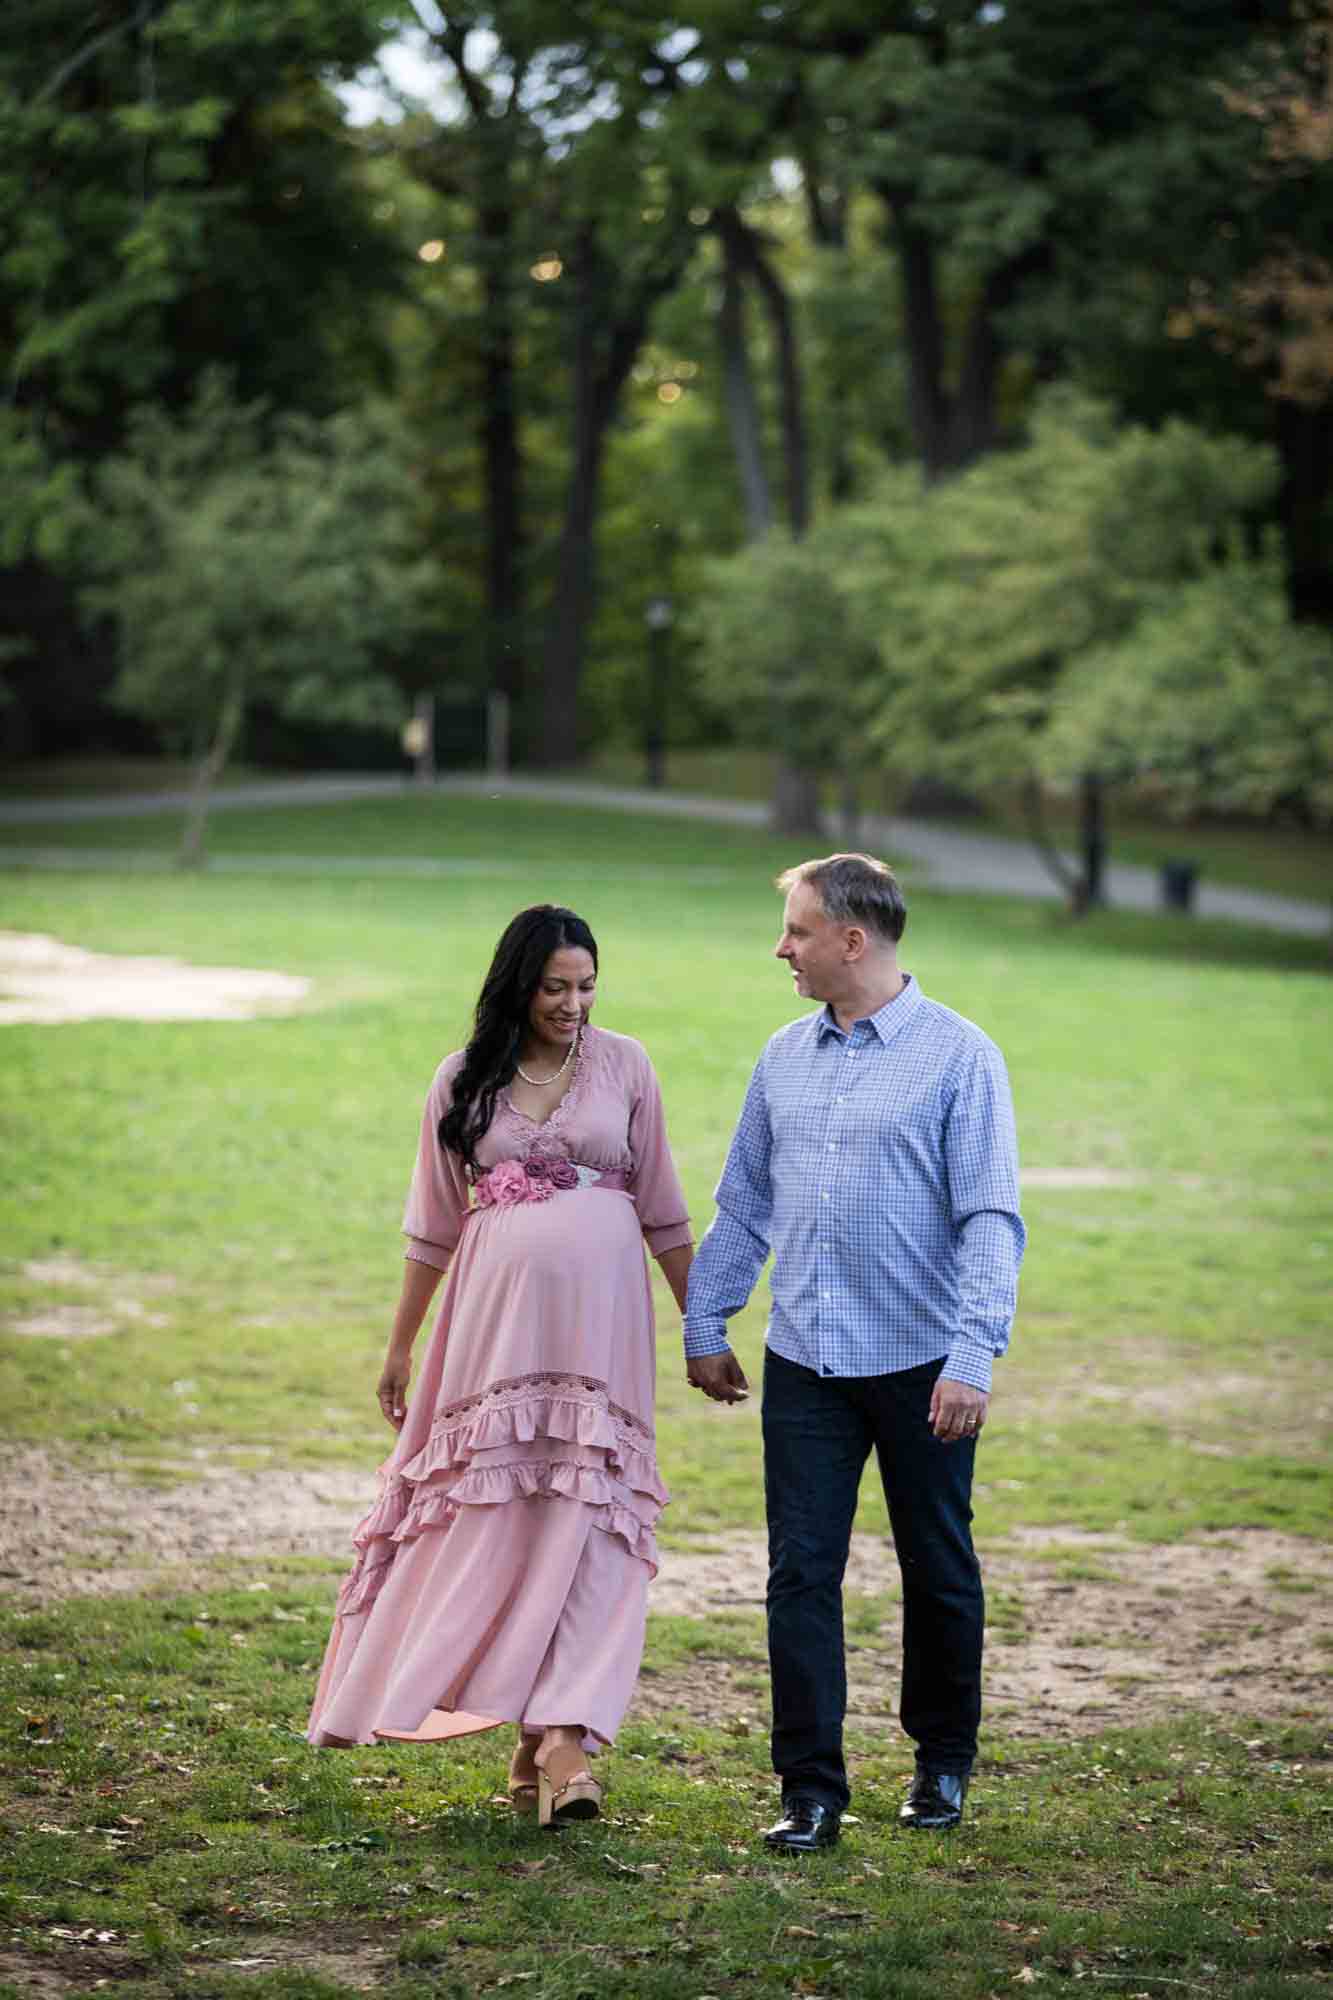 Pregnant woman and man holding hands and walking through Forest Park